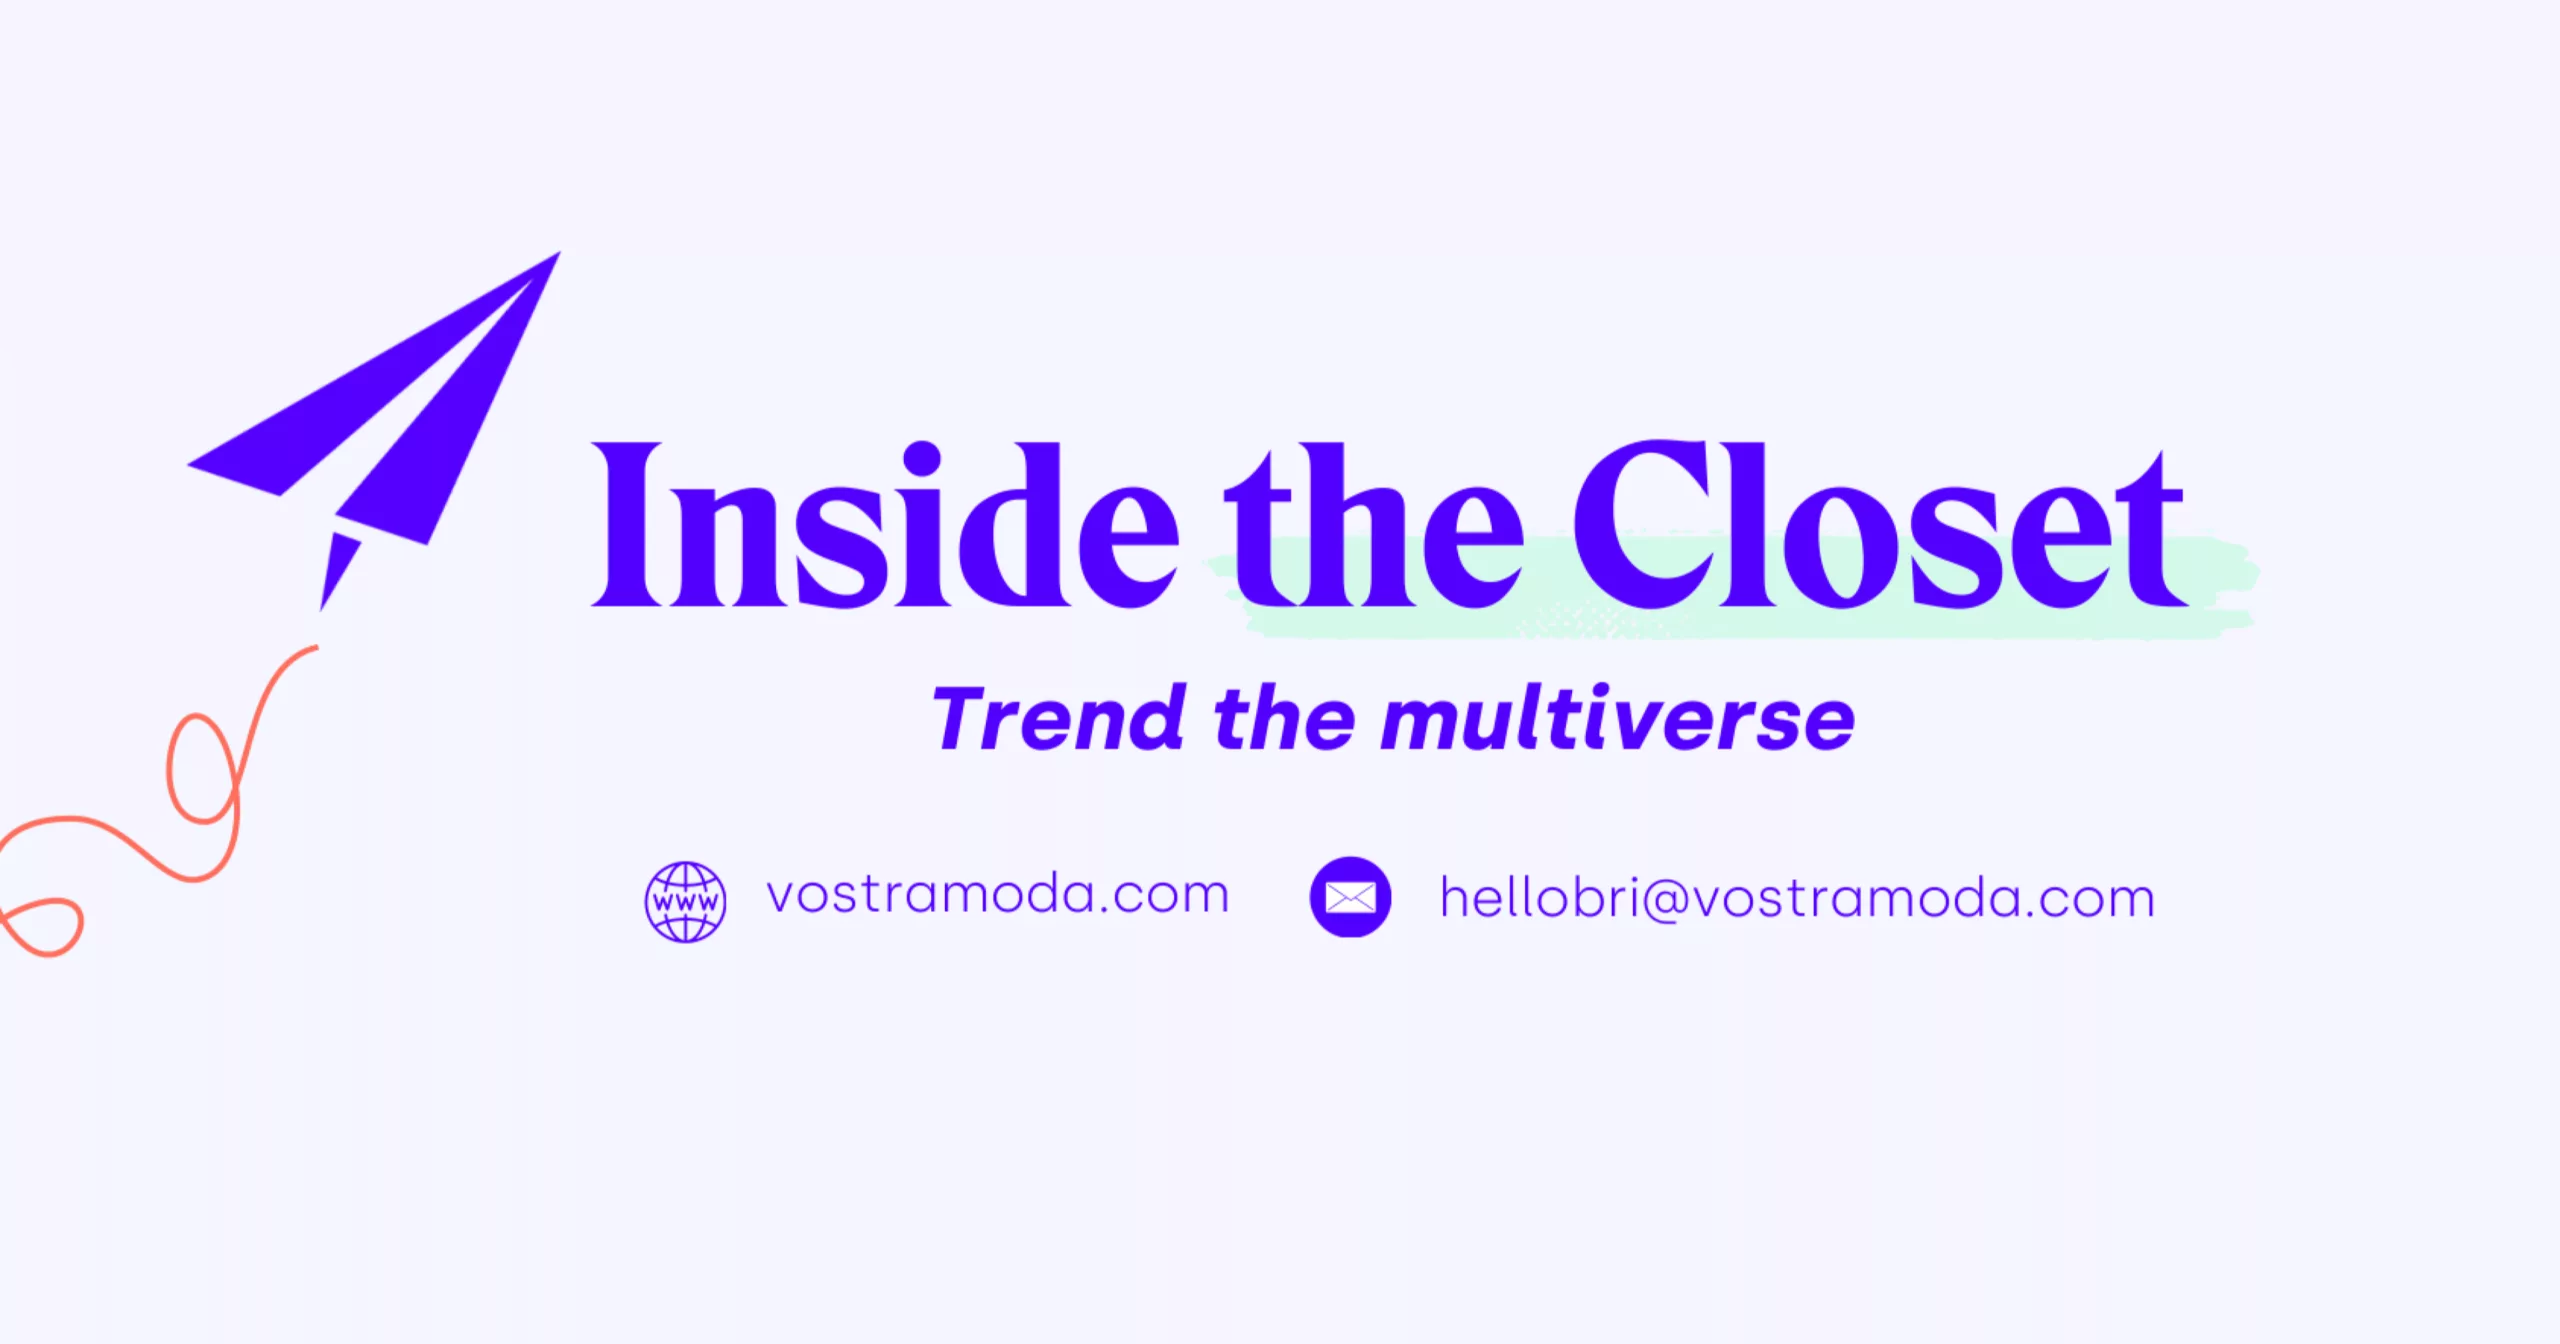 Inside the Closet free bi-monthly newsletter by Vostra Moda